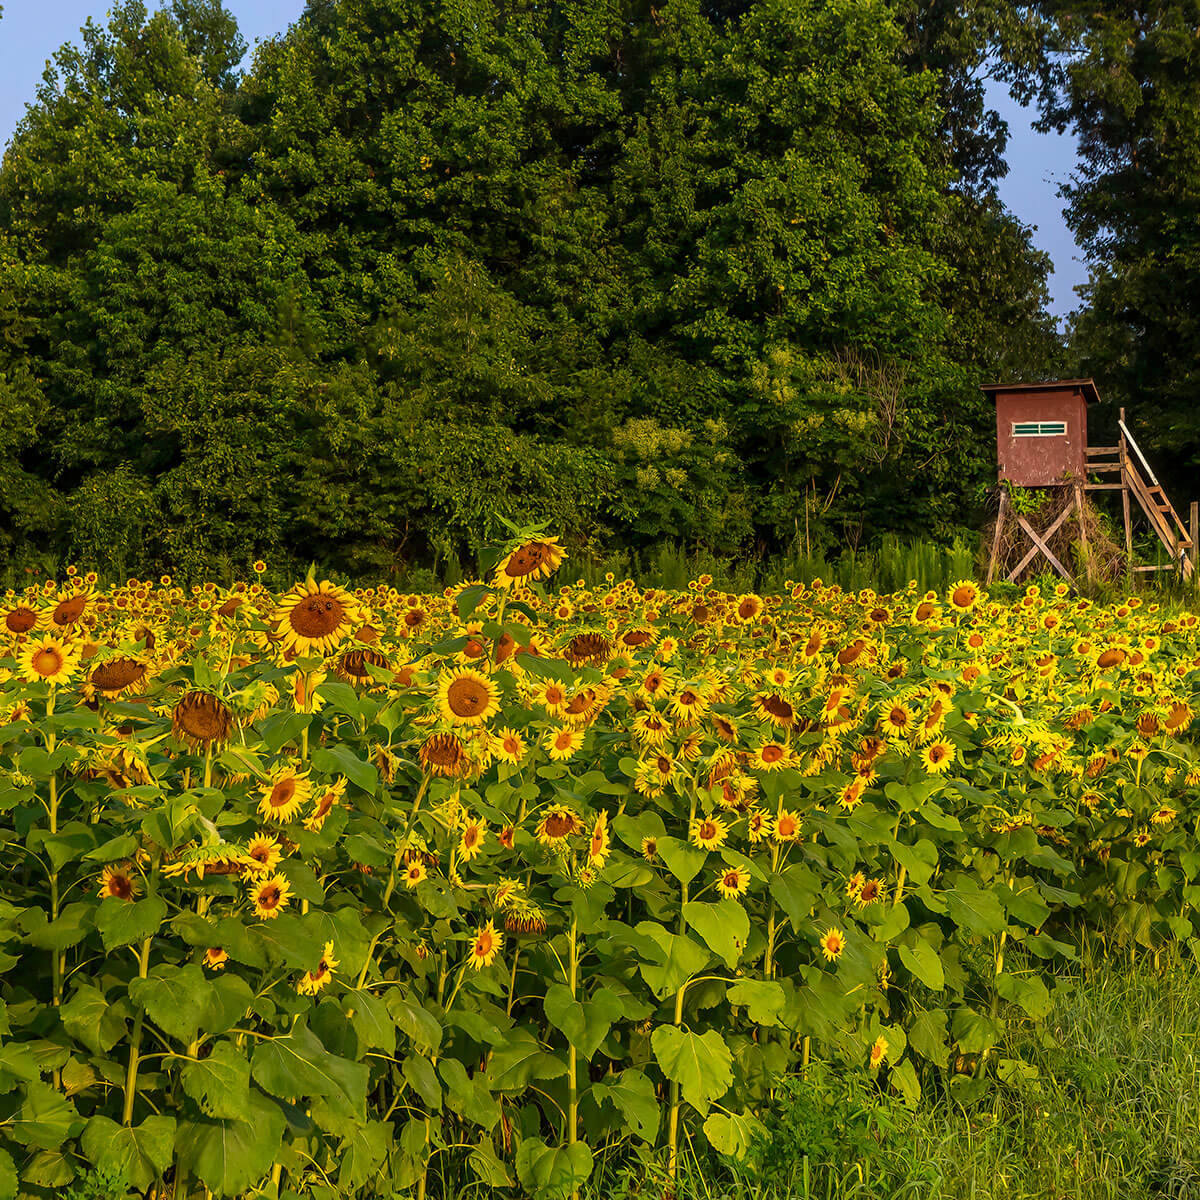 Locating the right plot for your sunflowers